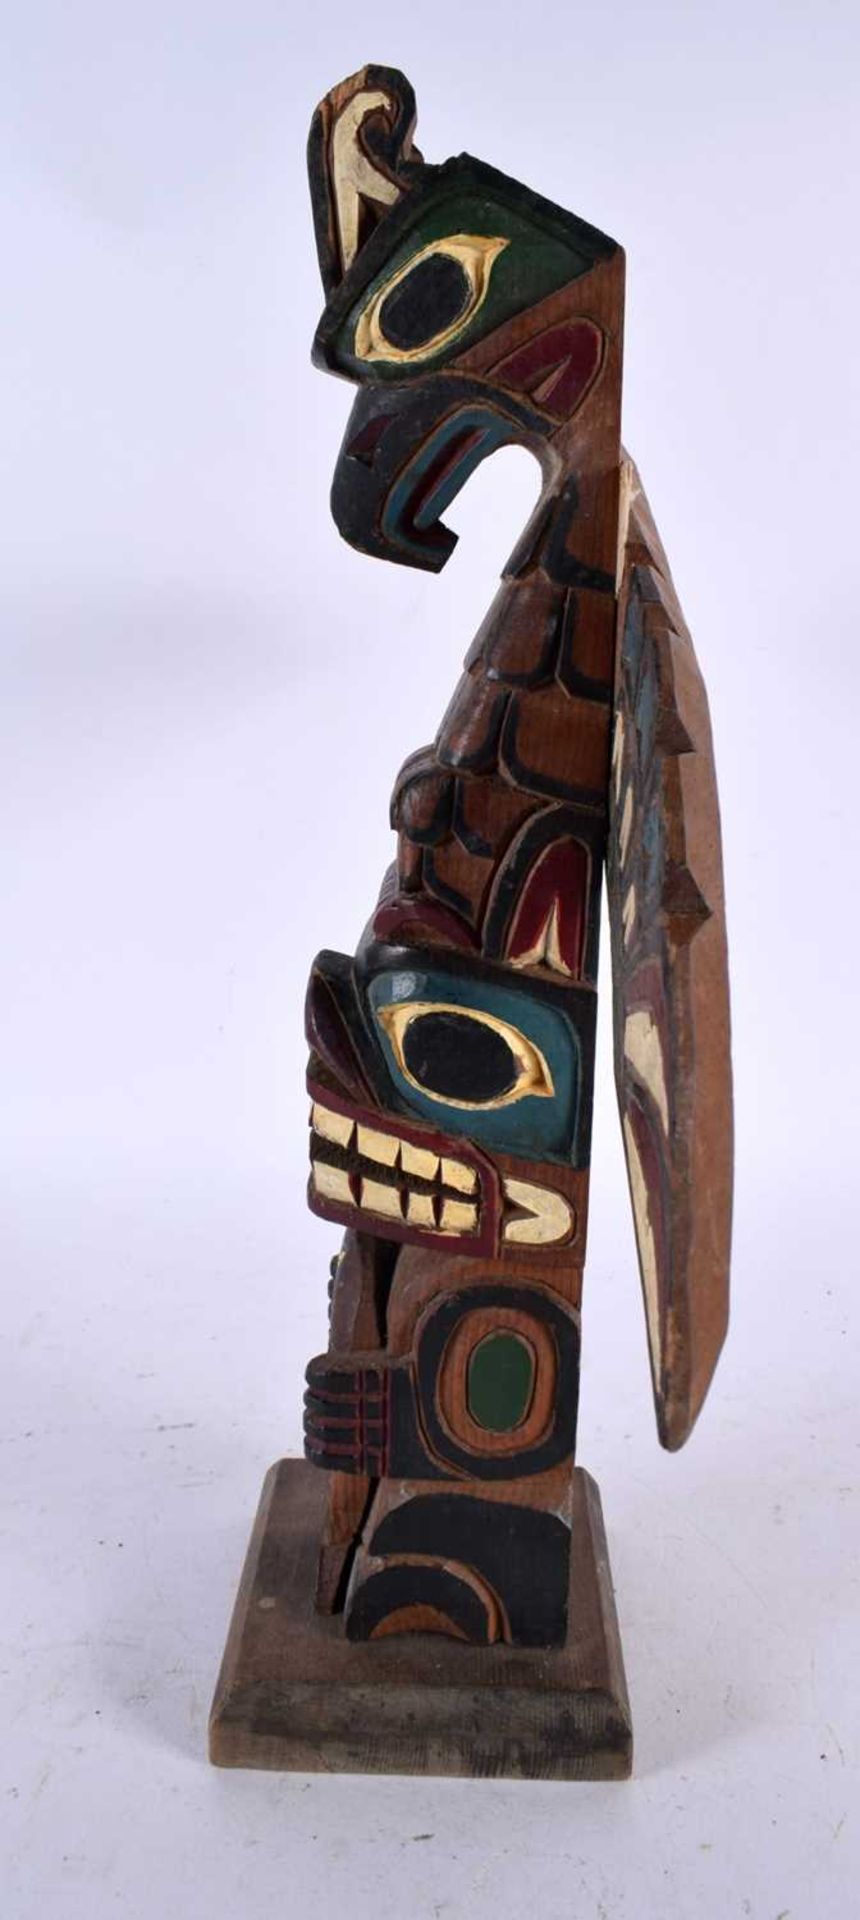 A NORTH AMERICAN CANADIAN INUIT MARLIN NORTHWEST COAST TOTEM by Marlin Alphonse. 32 cm x 24 cm. - Image 2 of 33